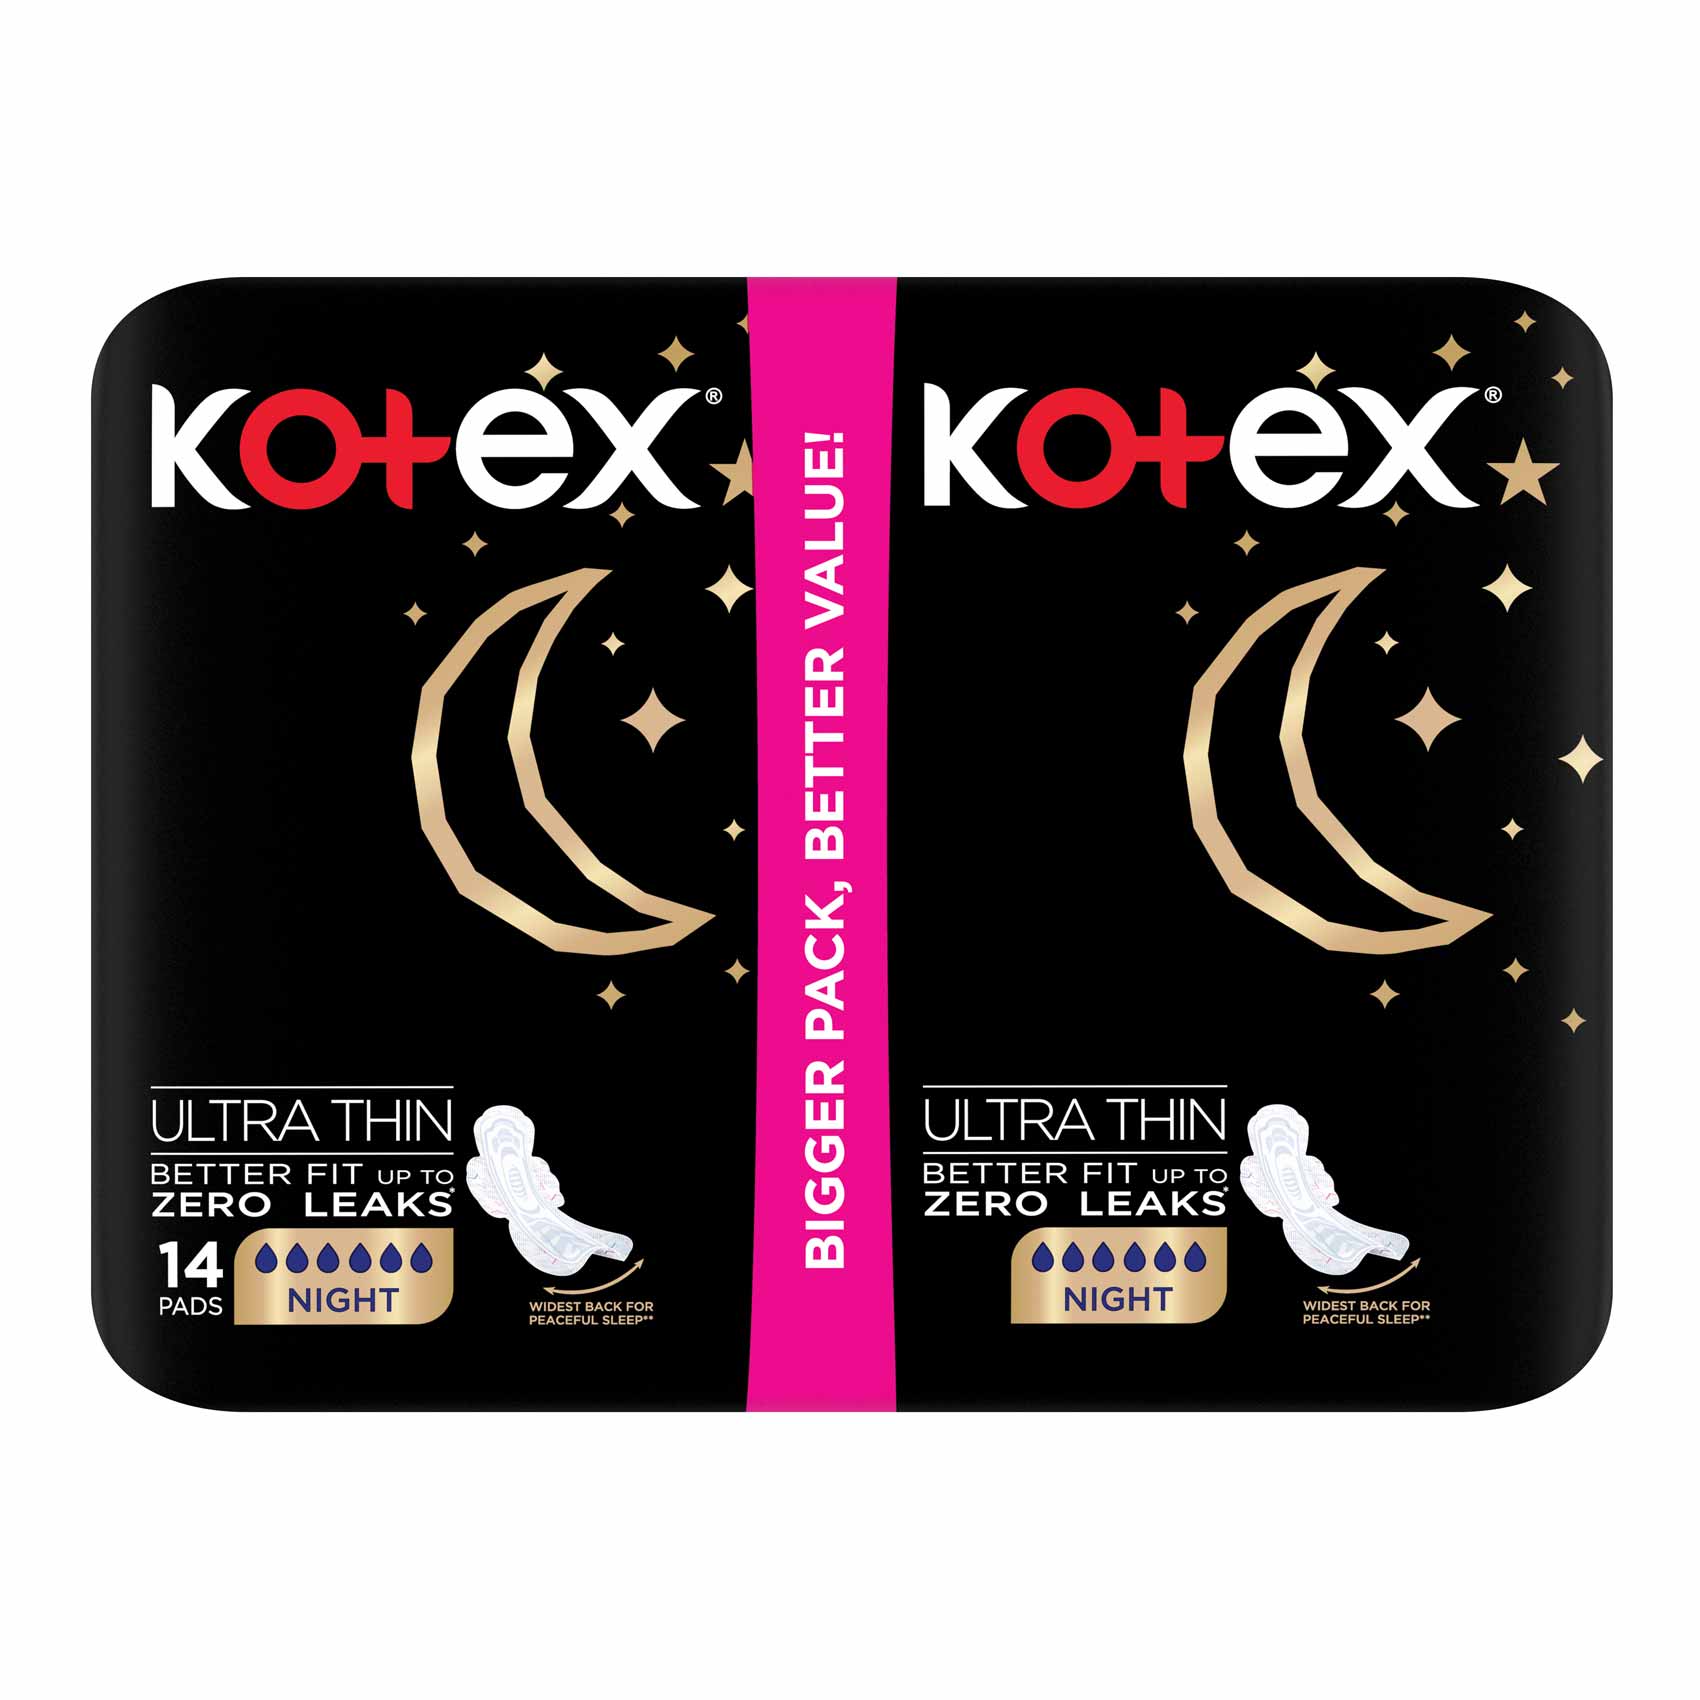 Kotex Ultra Thin Comfort And Clean Night Wings Duo Sanitary Pads 14 Pieces